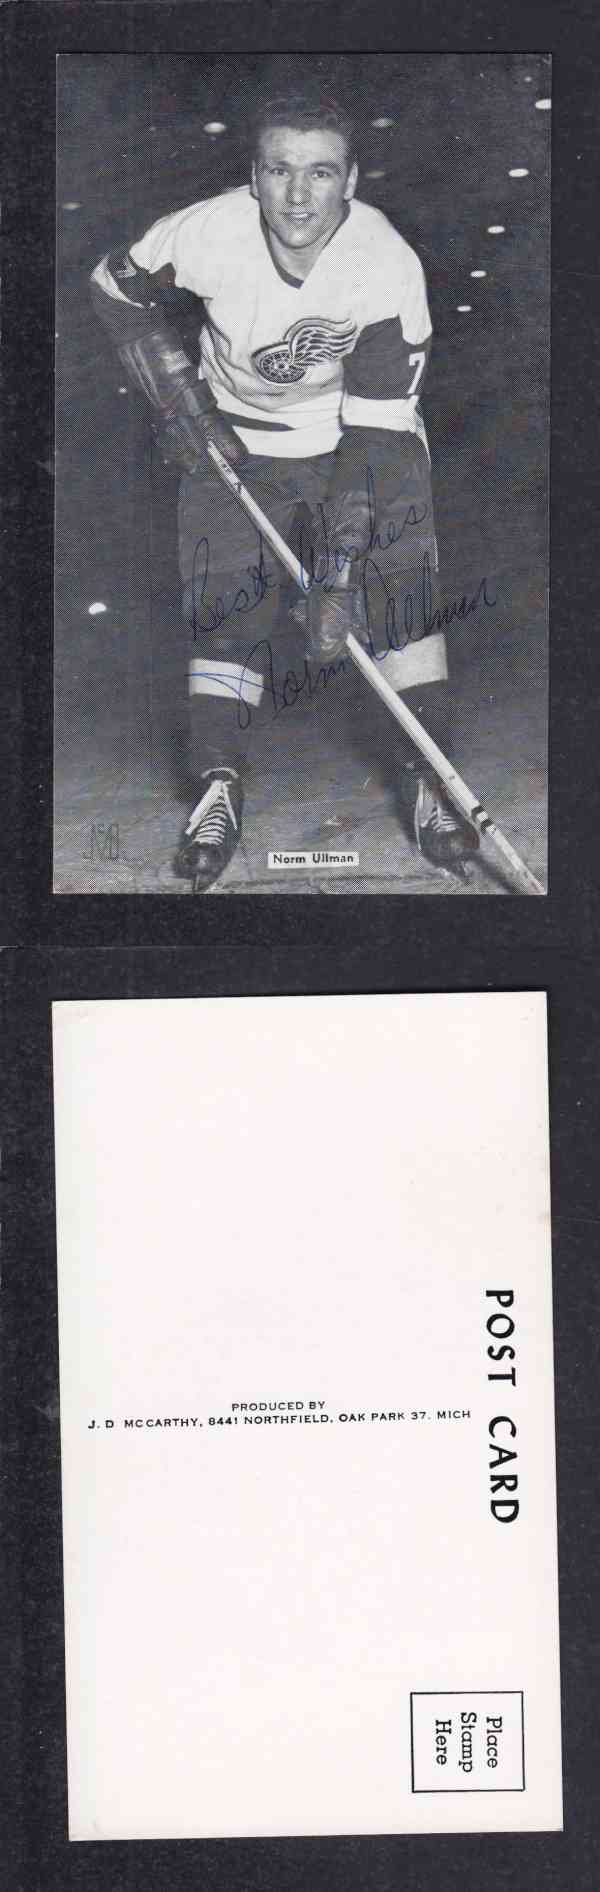 1960 'S DETROIT RED WINGS N.ULLMAN AUTOGRAPHED POST CARD photo